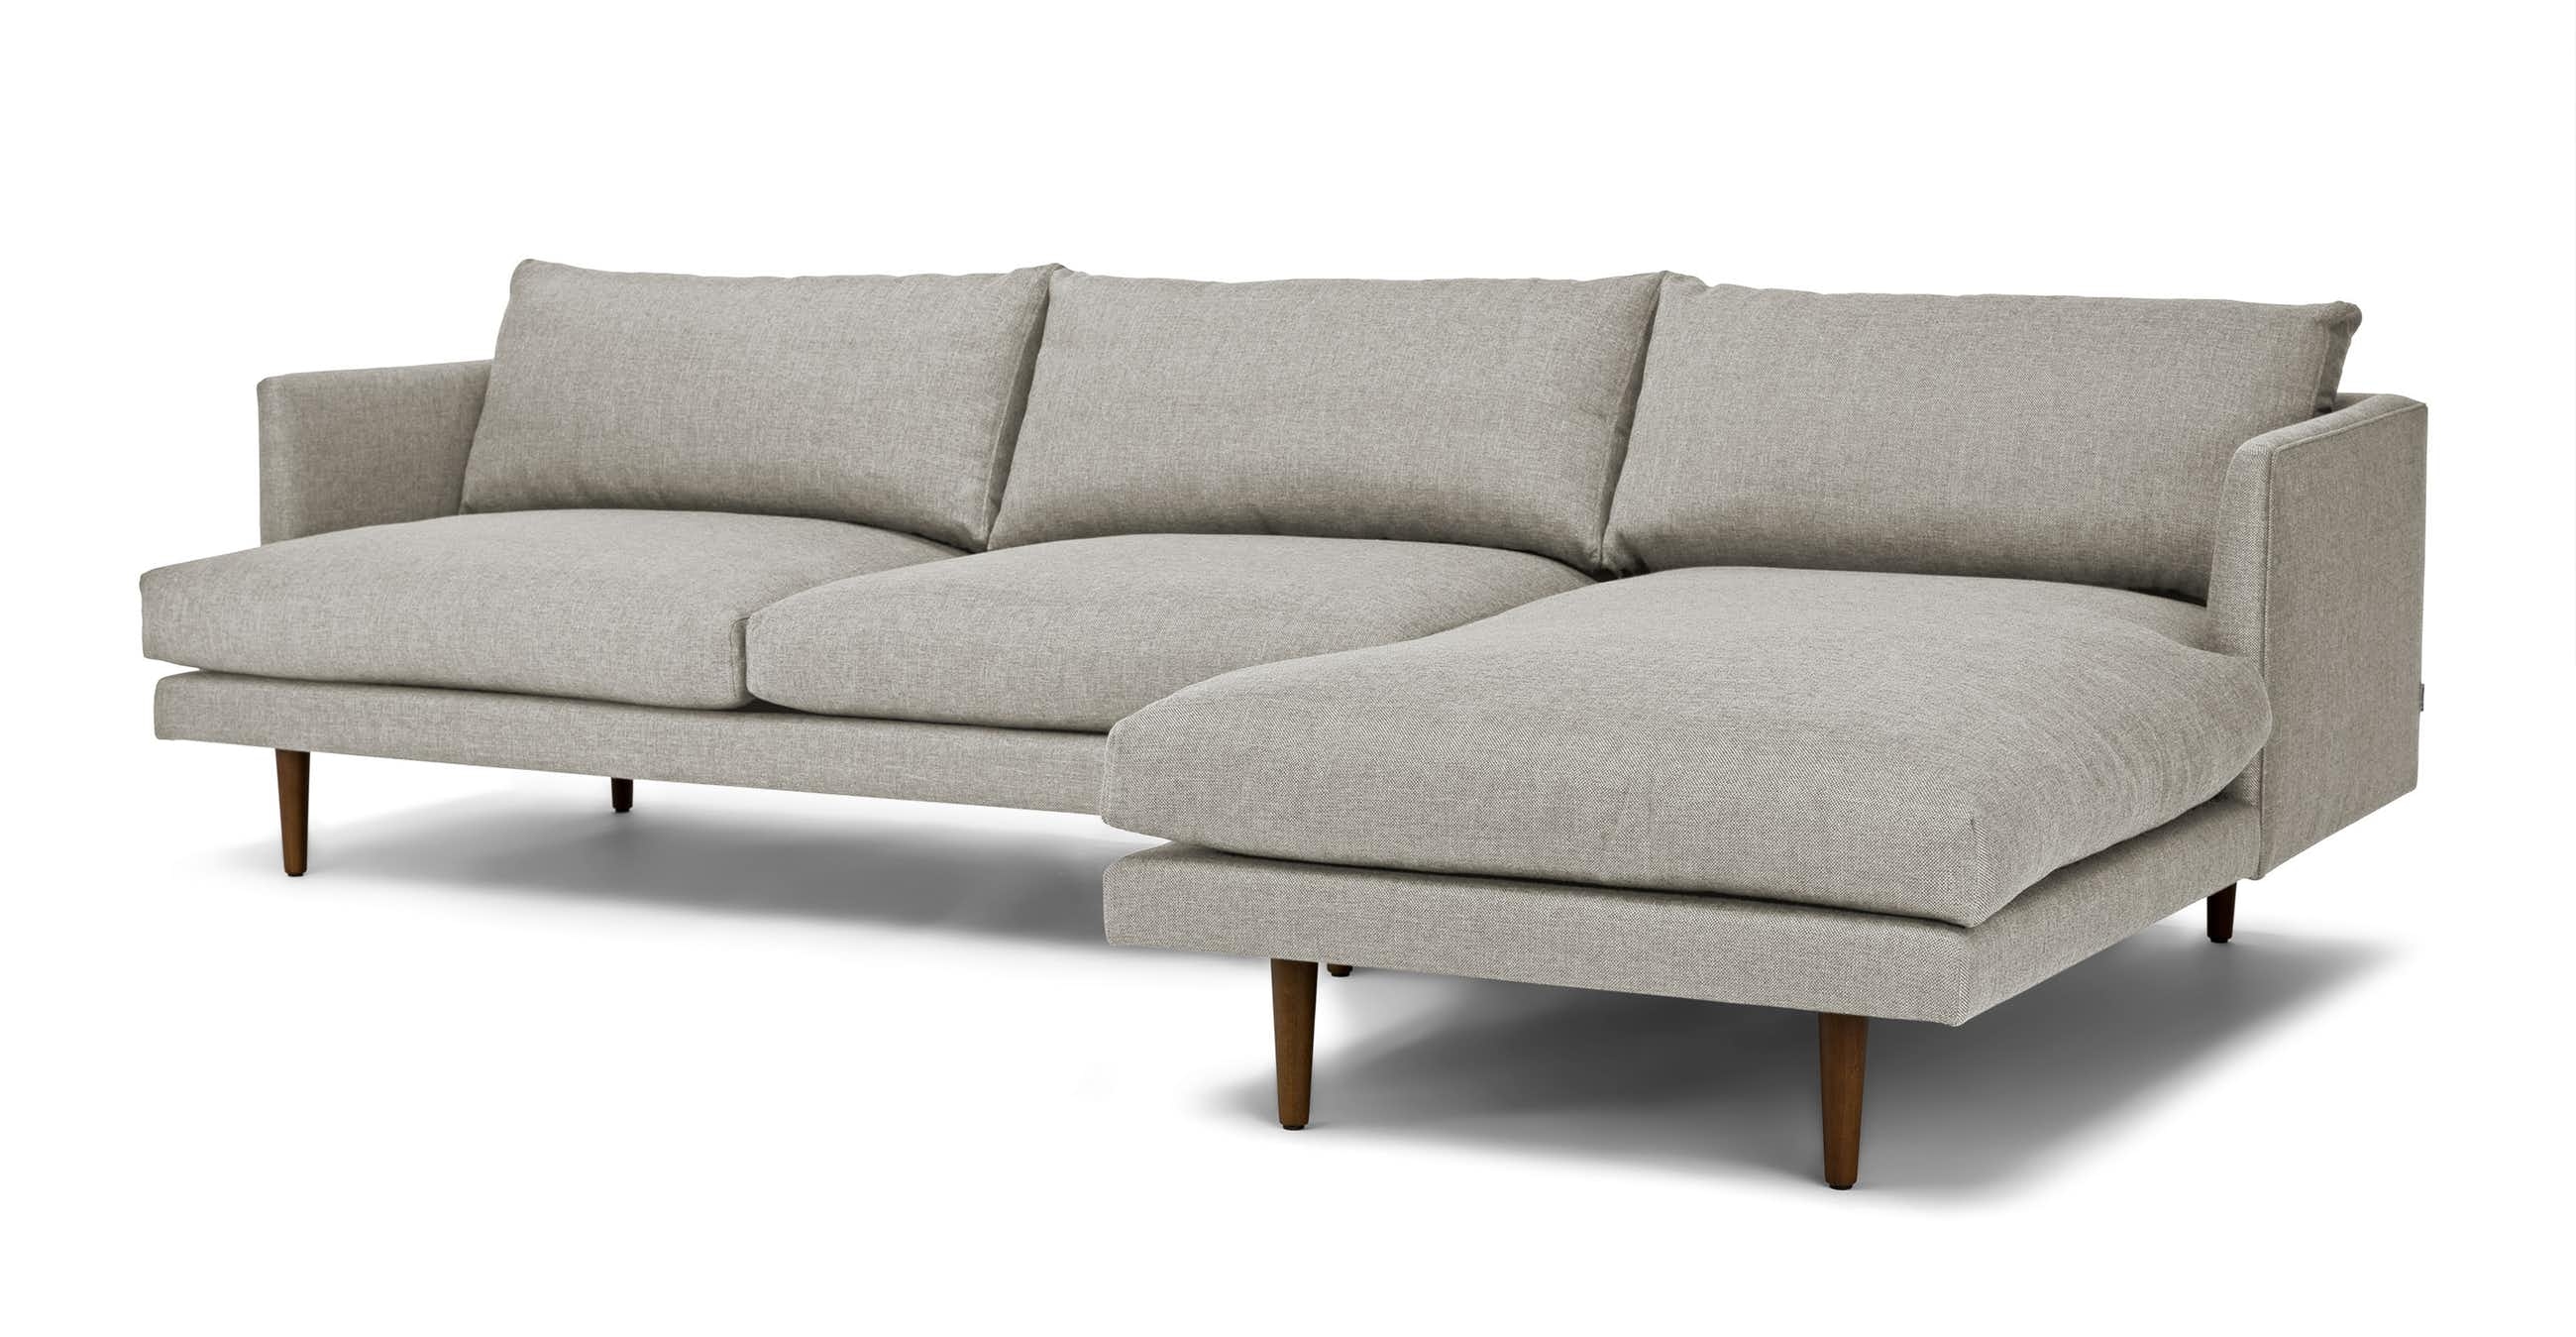 Burrard Seasalt Gray Right Sectional - Image 1